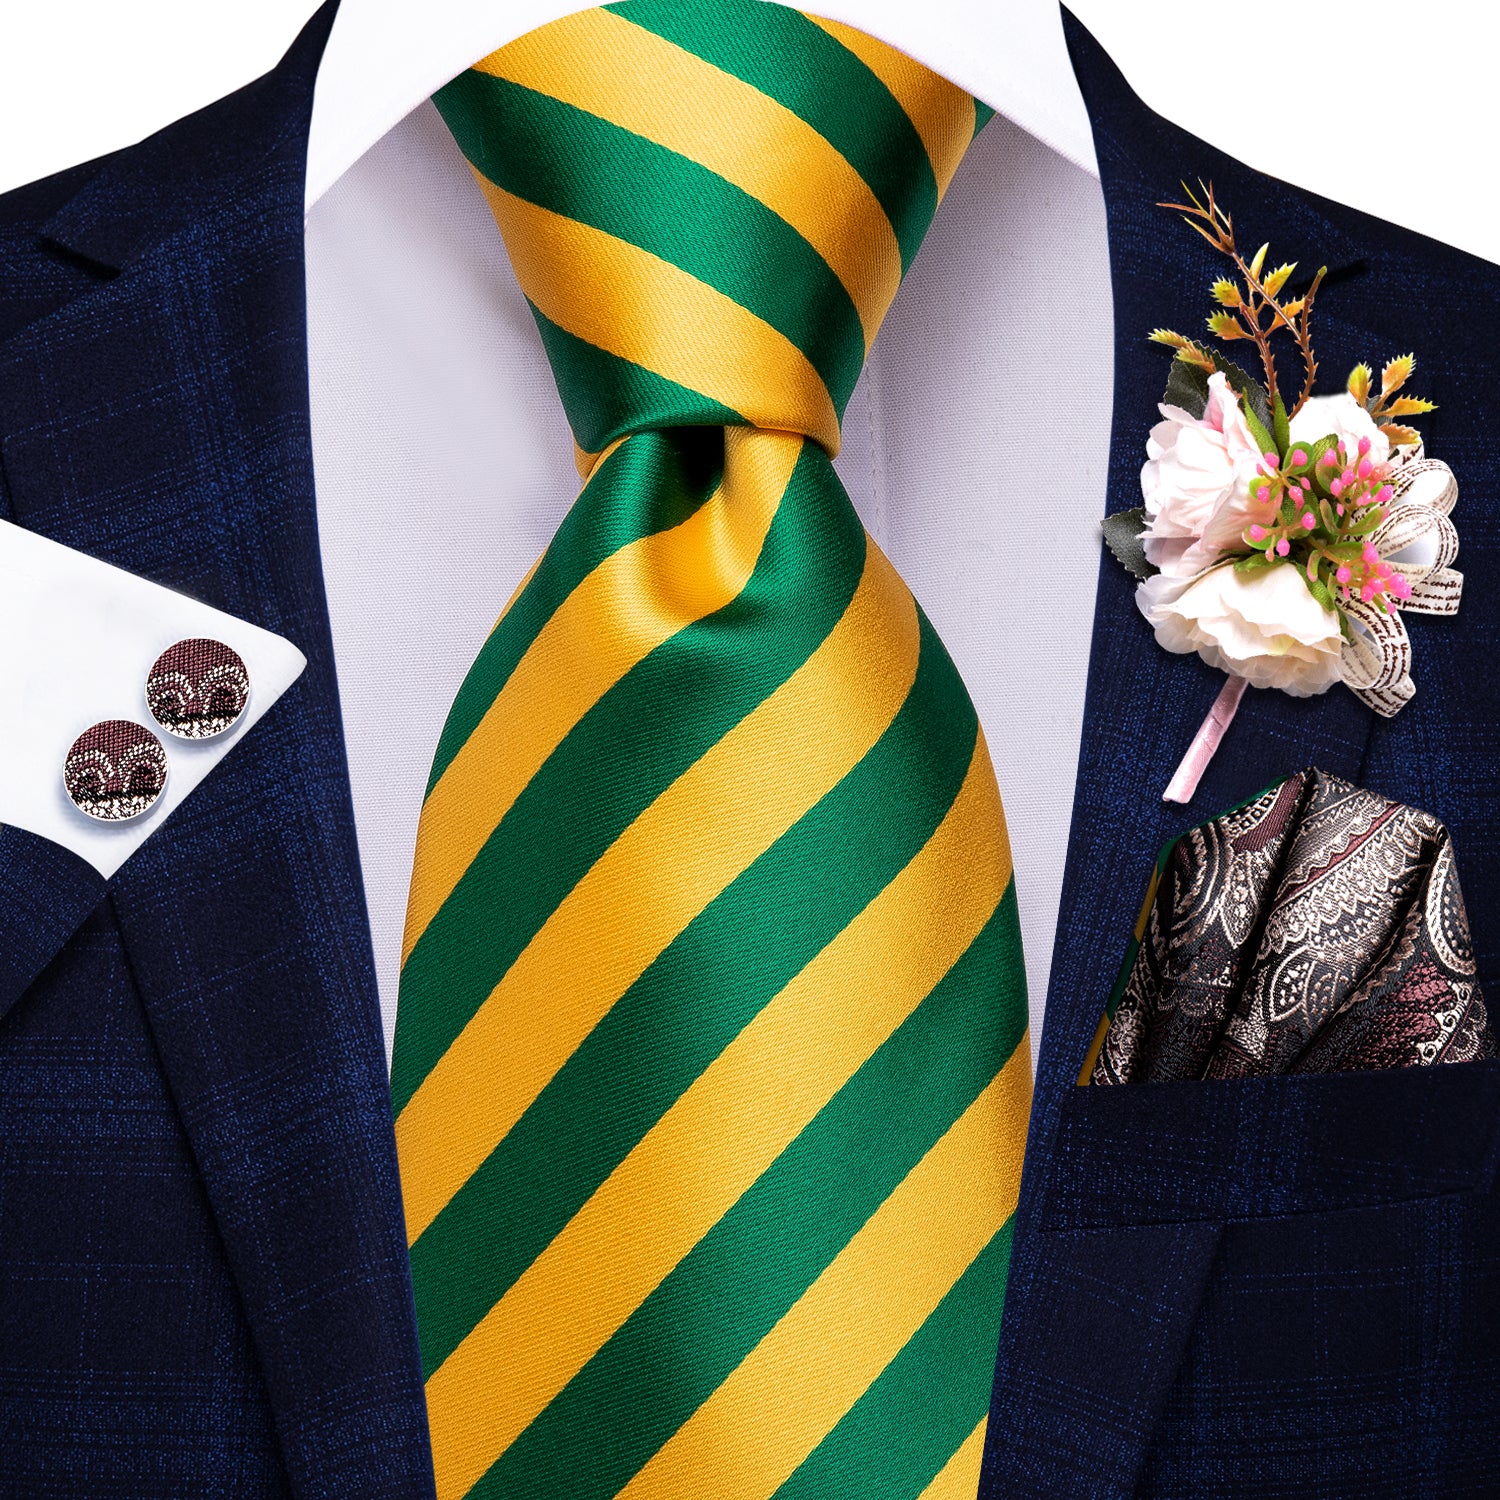 Yellow Green Striped Tie Pocket Square Cufflinks Set with Wedding Brooch